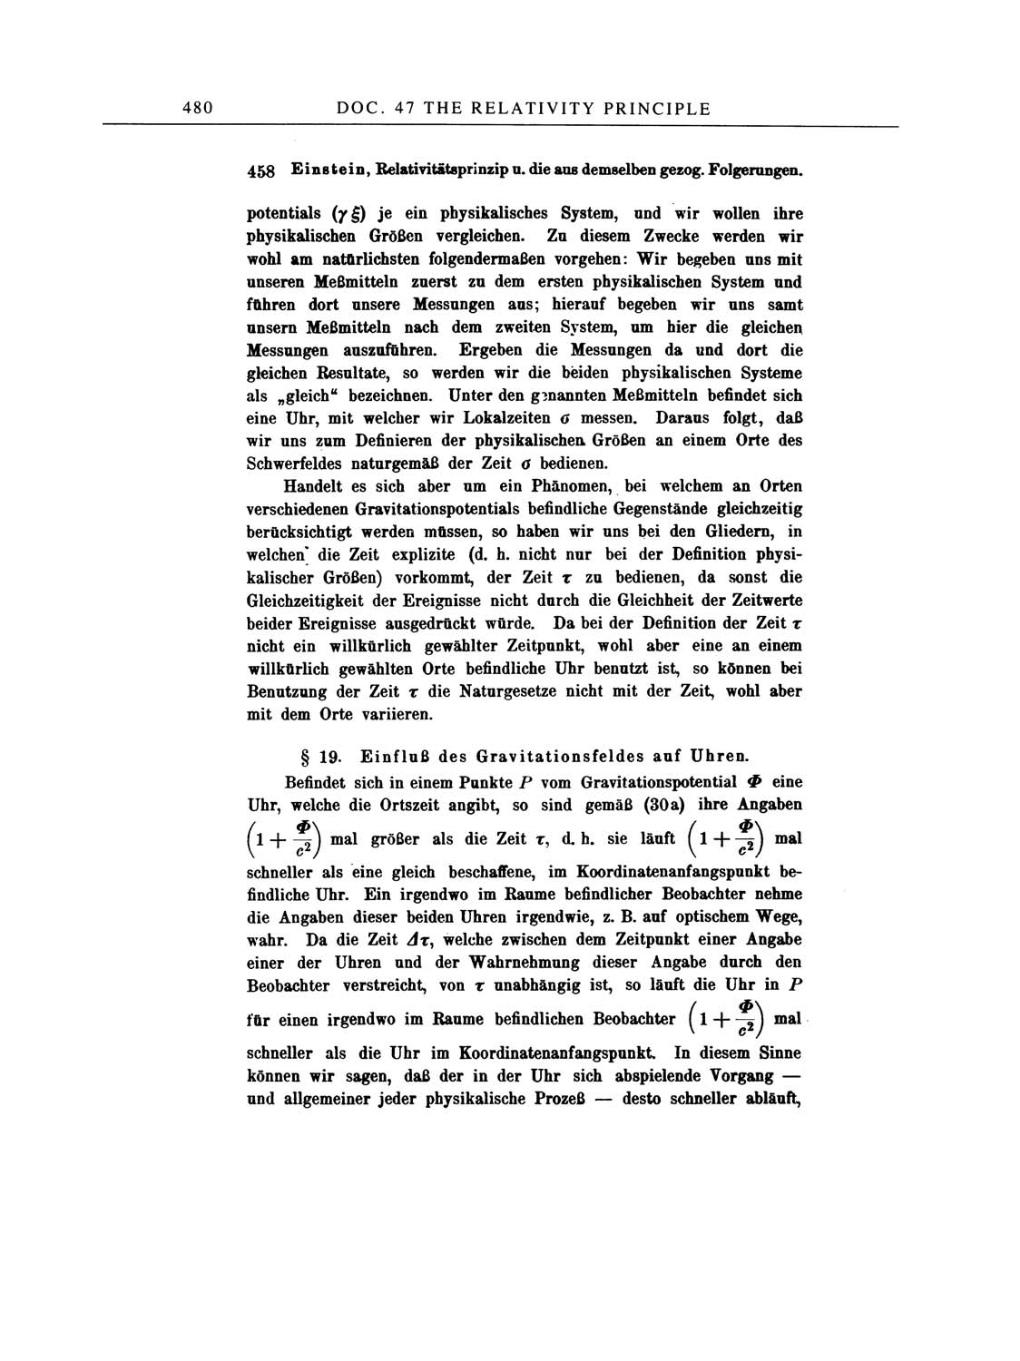 Volume 2: The Swiss Years: Writings, 1900-1909 page 480